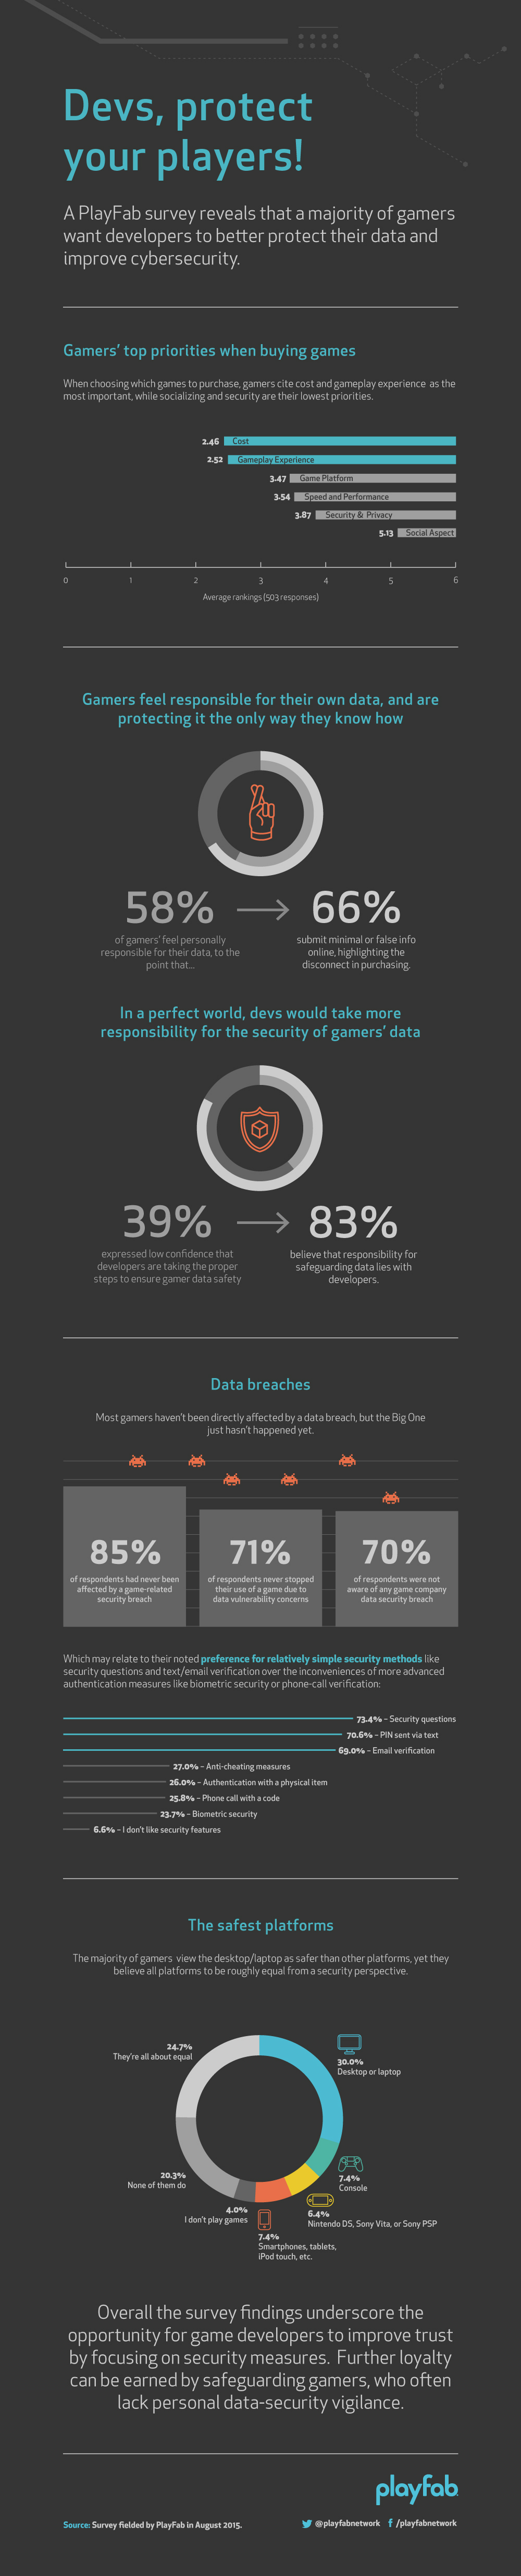 playfab_datasecurity_infographic